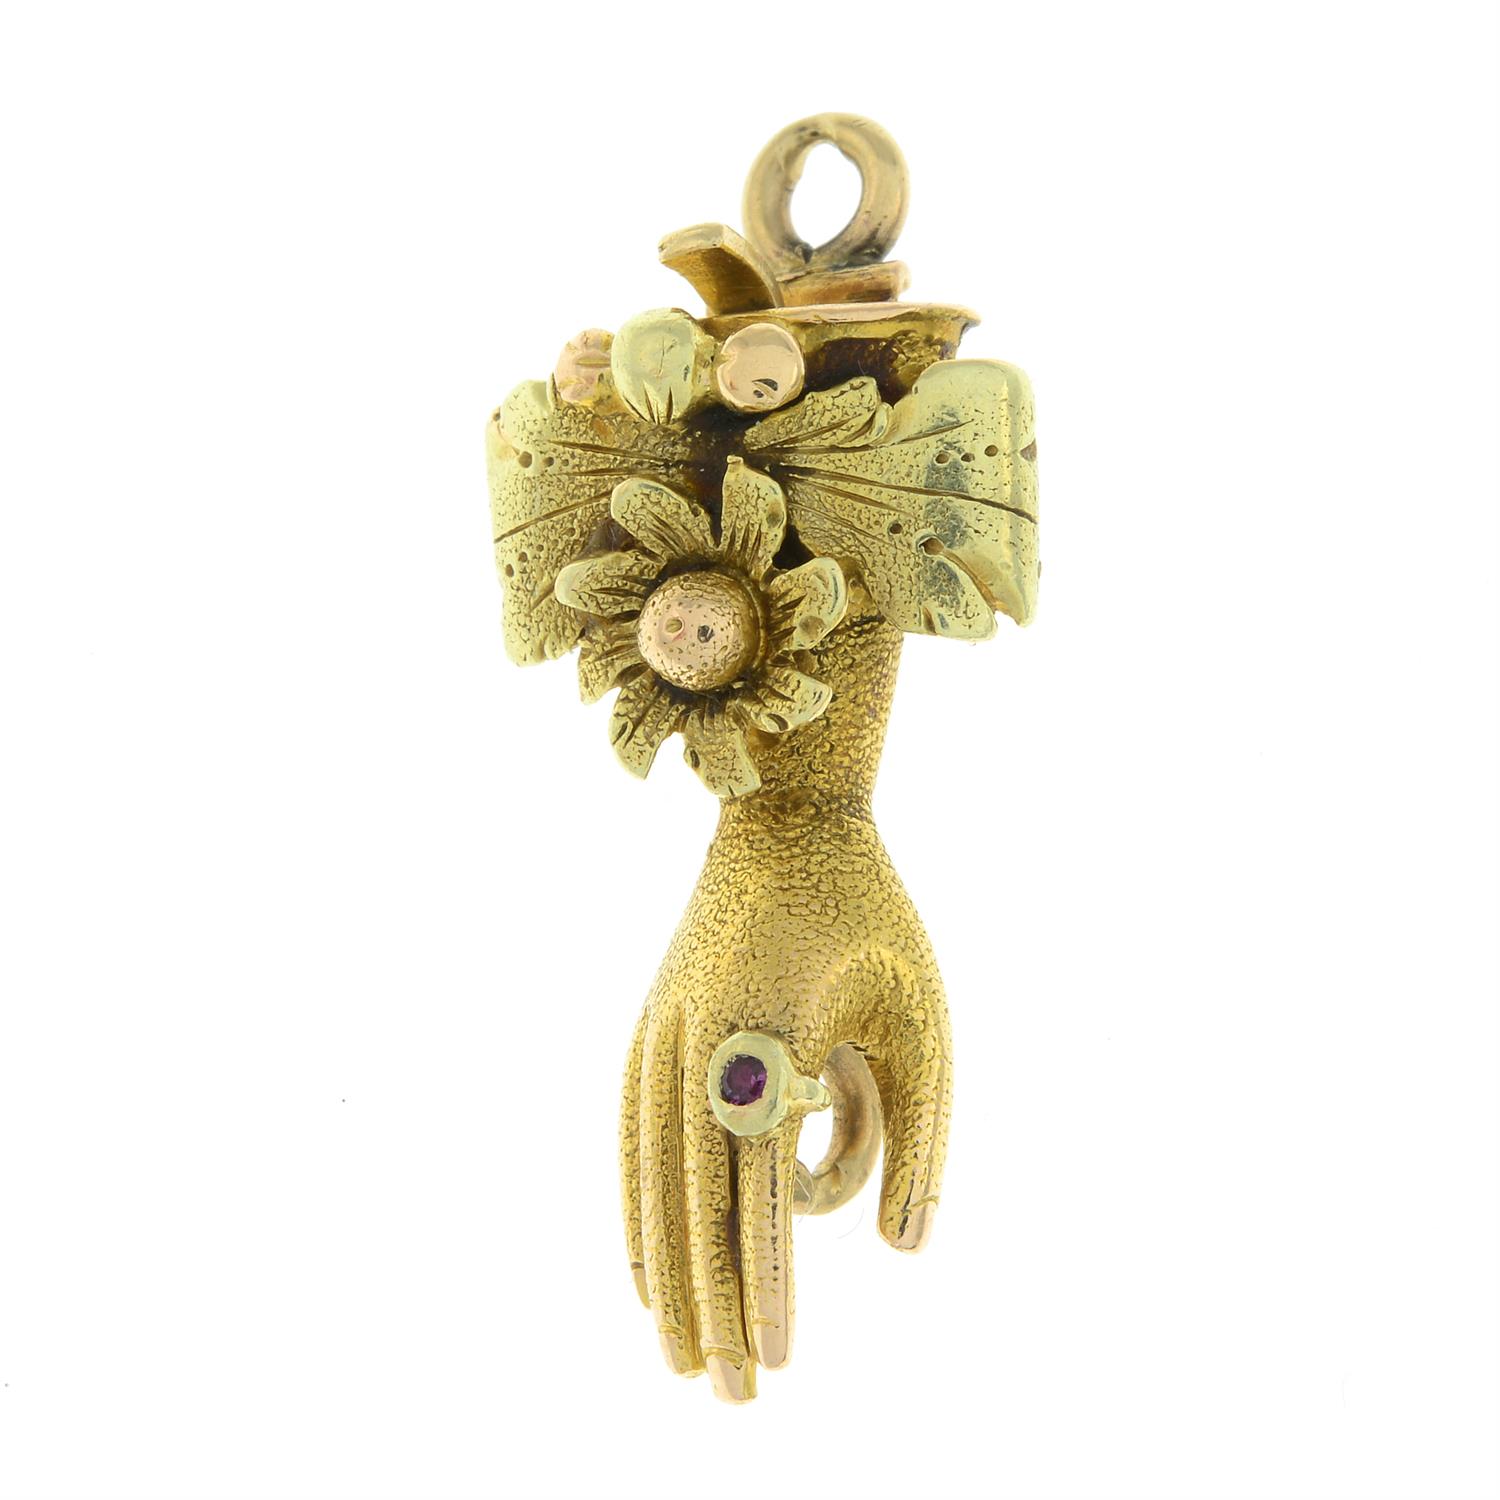 19th century gold and ruby gloved hand clasp - Image 3 of 6